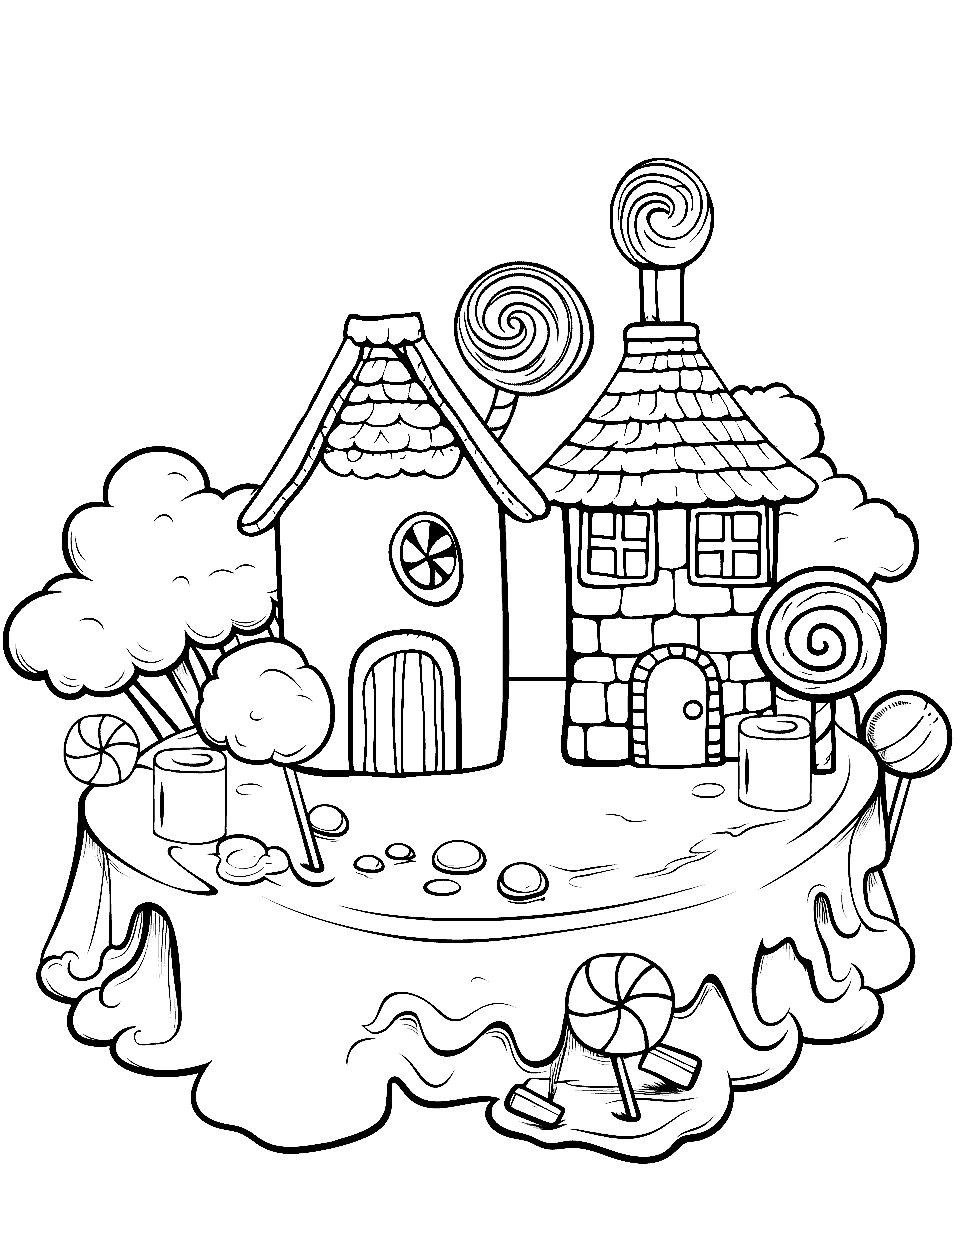 Yummy Dessert Island  Candy Coloring Page - An island where the trees are made of sugar and the sand is muffin, cream, and other gooey sweetness.